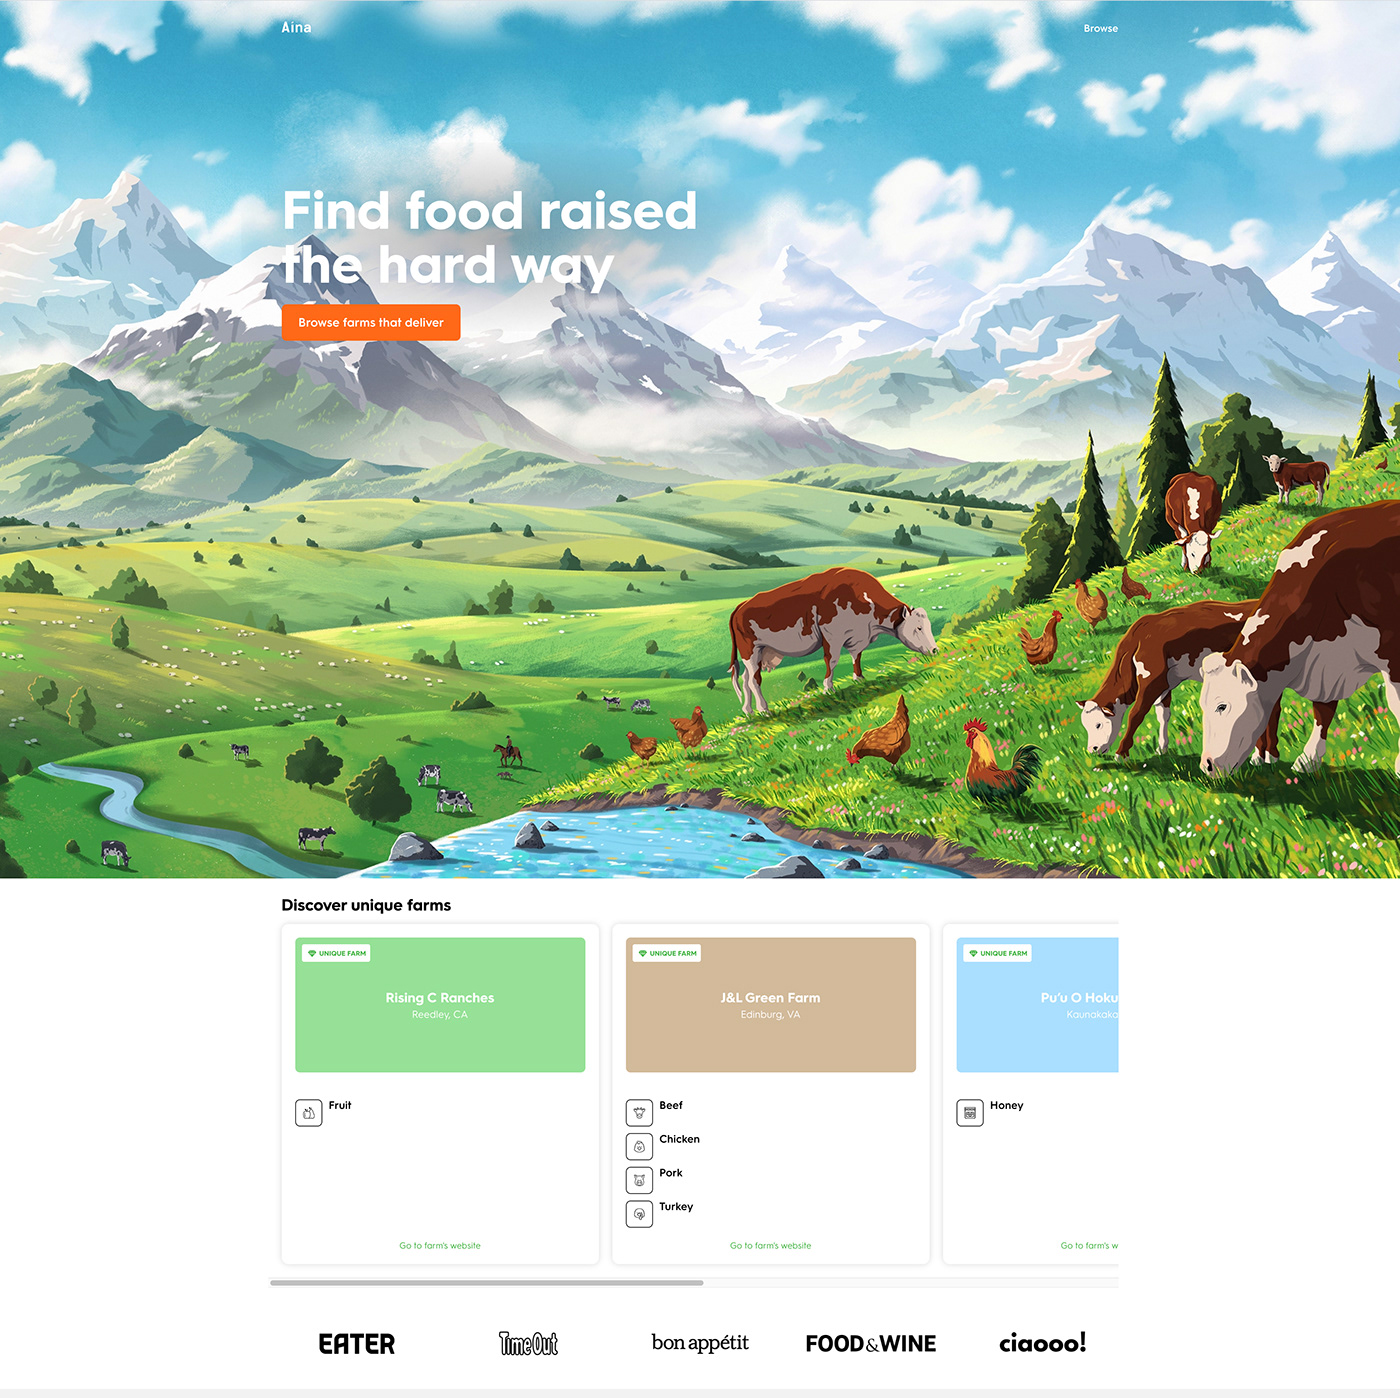 cows delivering food farms green ILLUSTRATION  illustration landscape Landscape mountains Sustainability